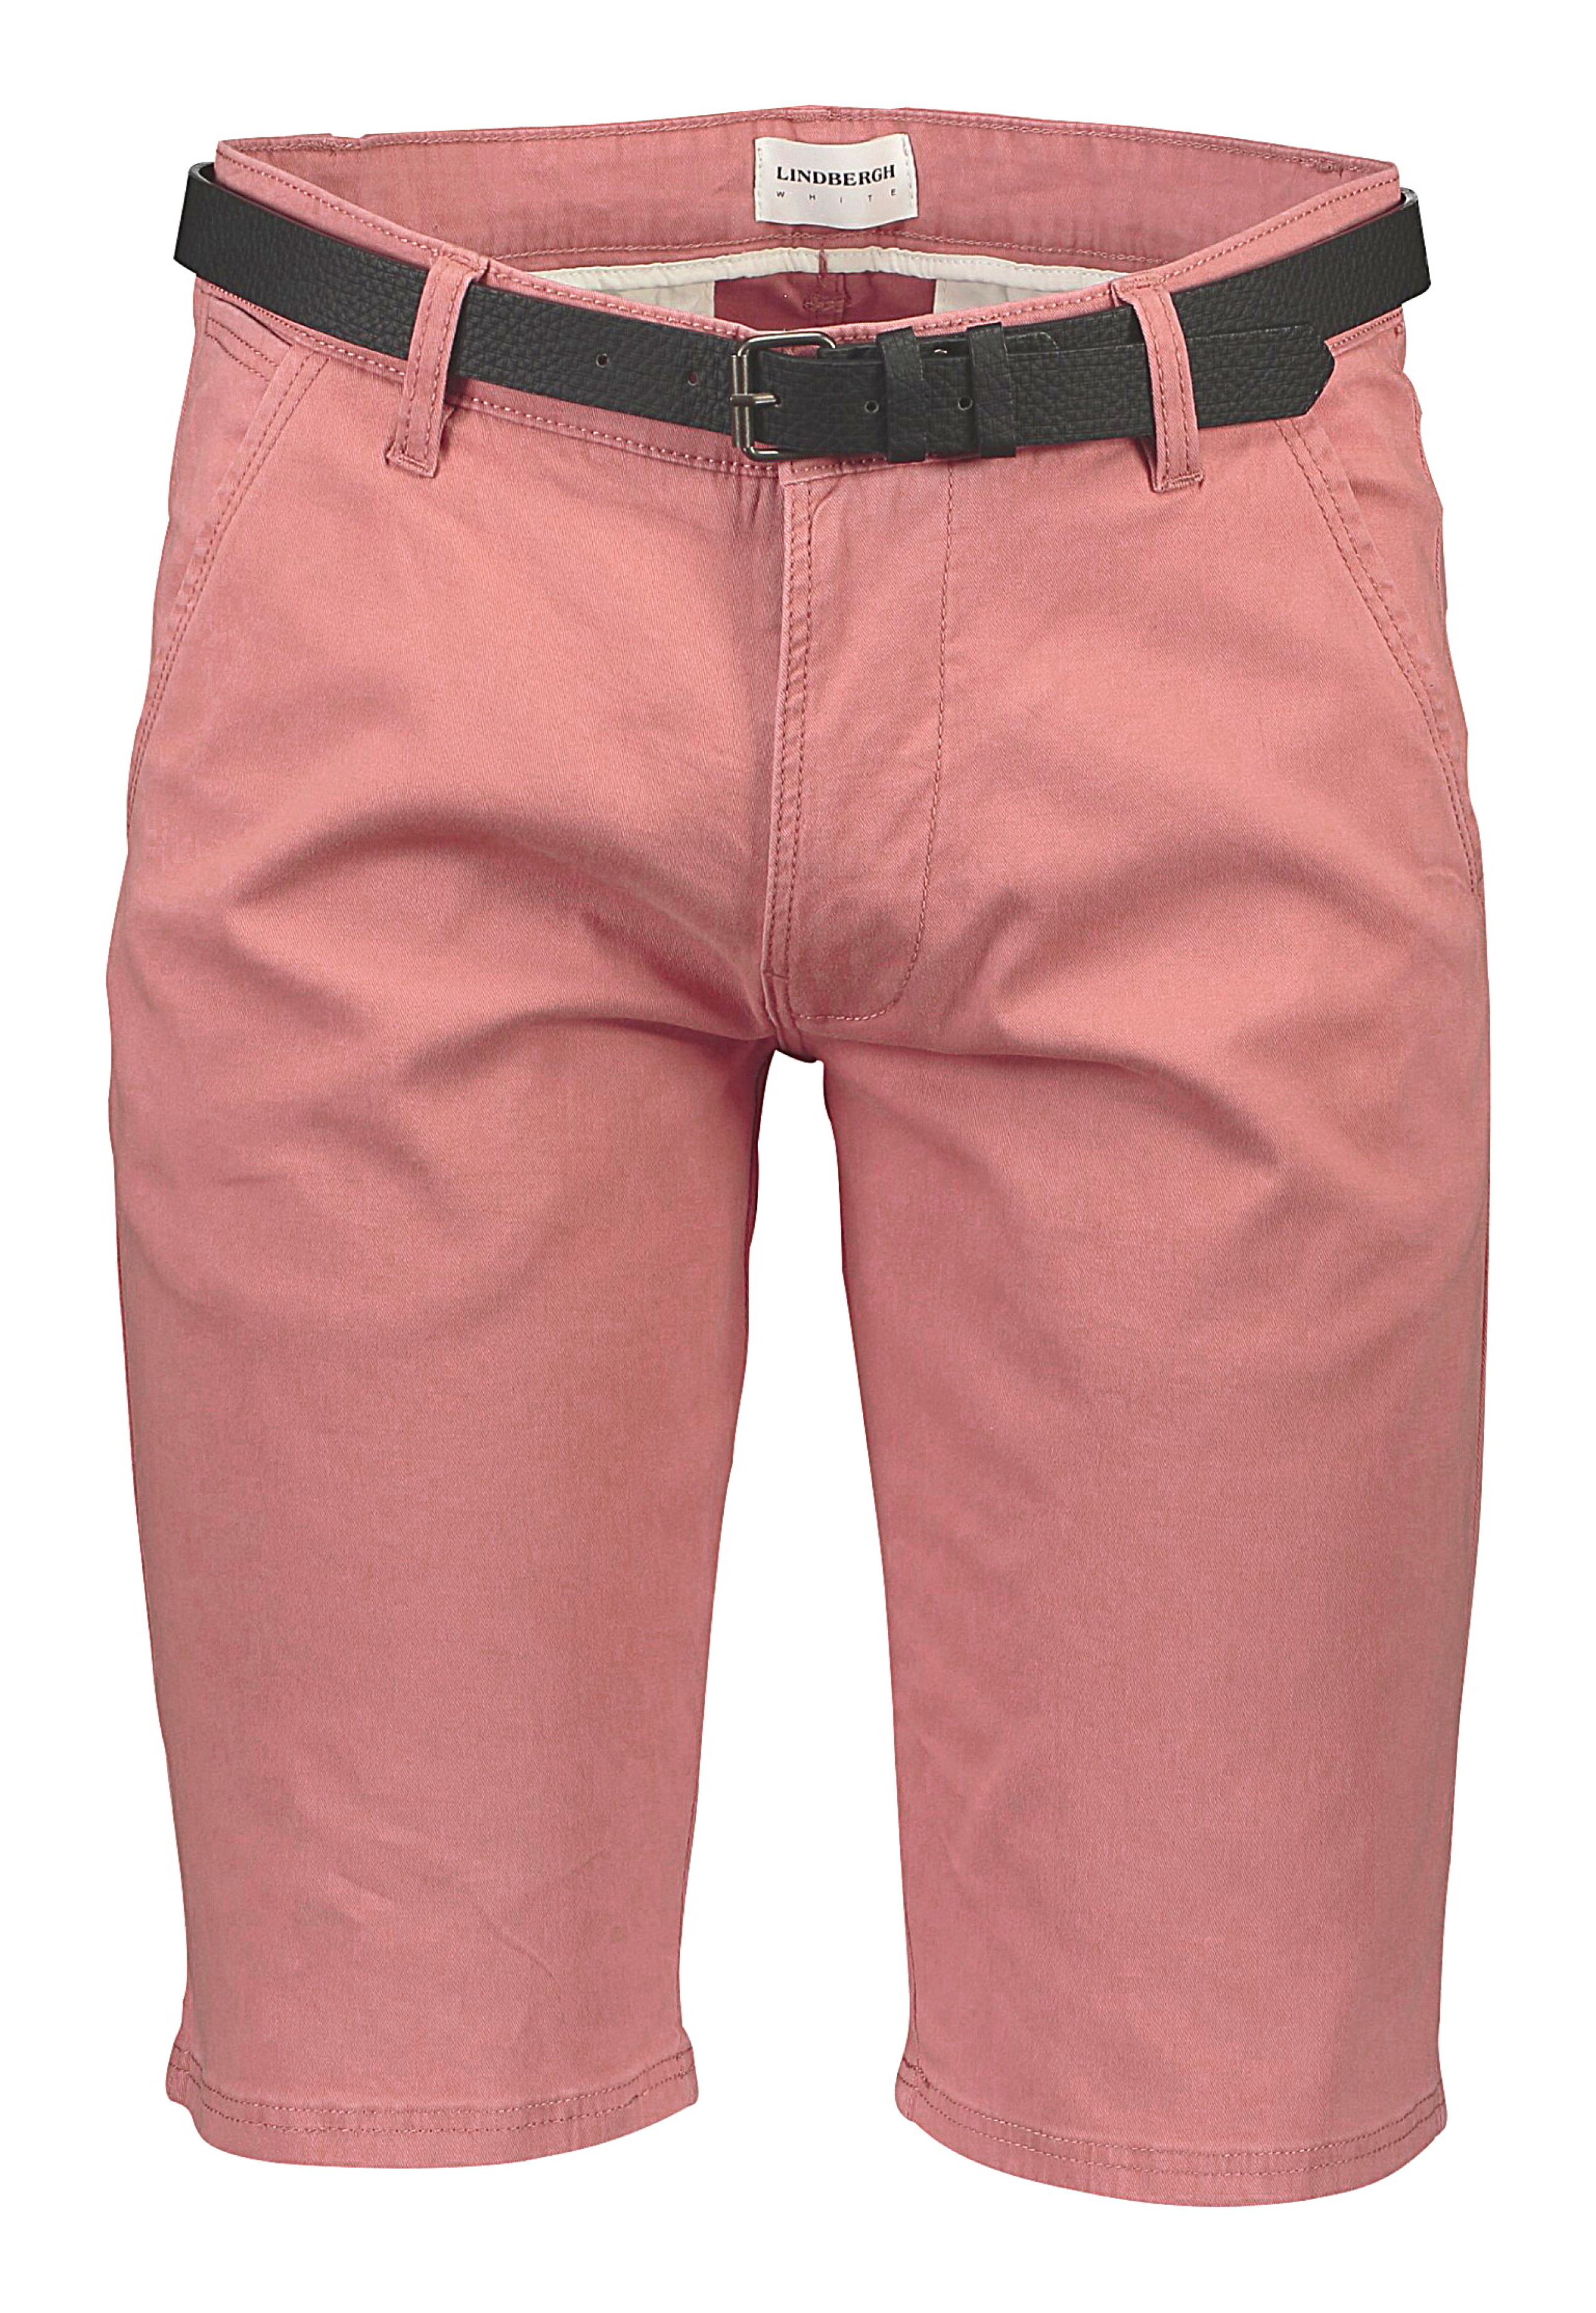 Lindbergh Chino shorts red / dusty rose